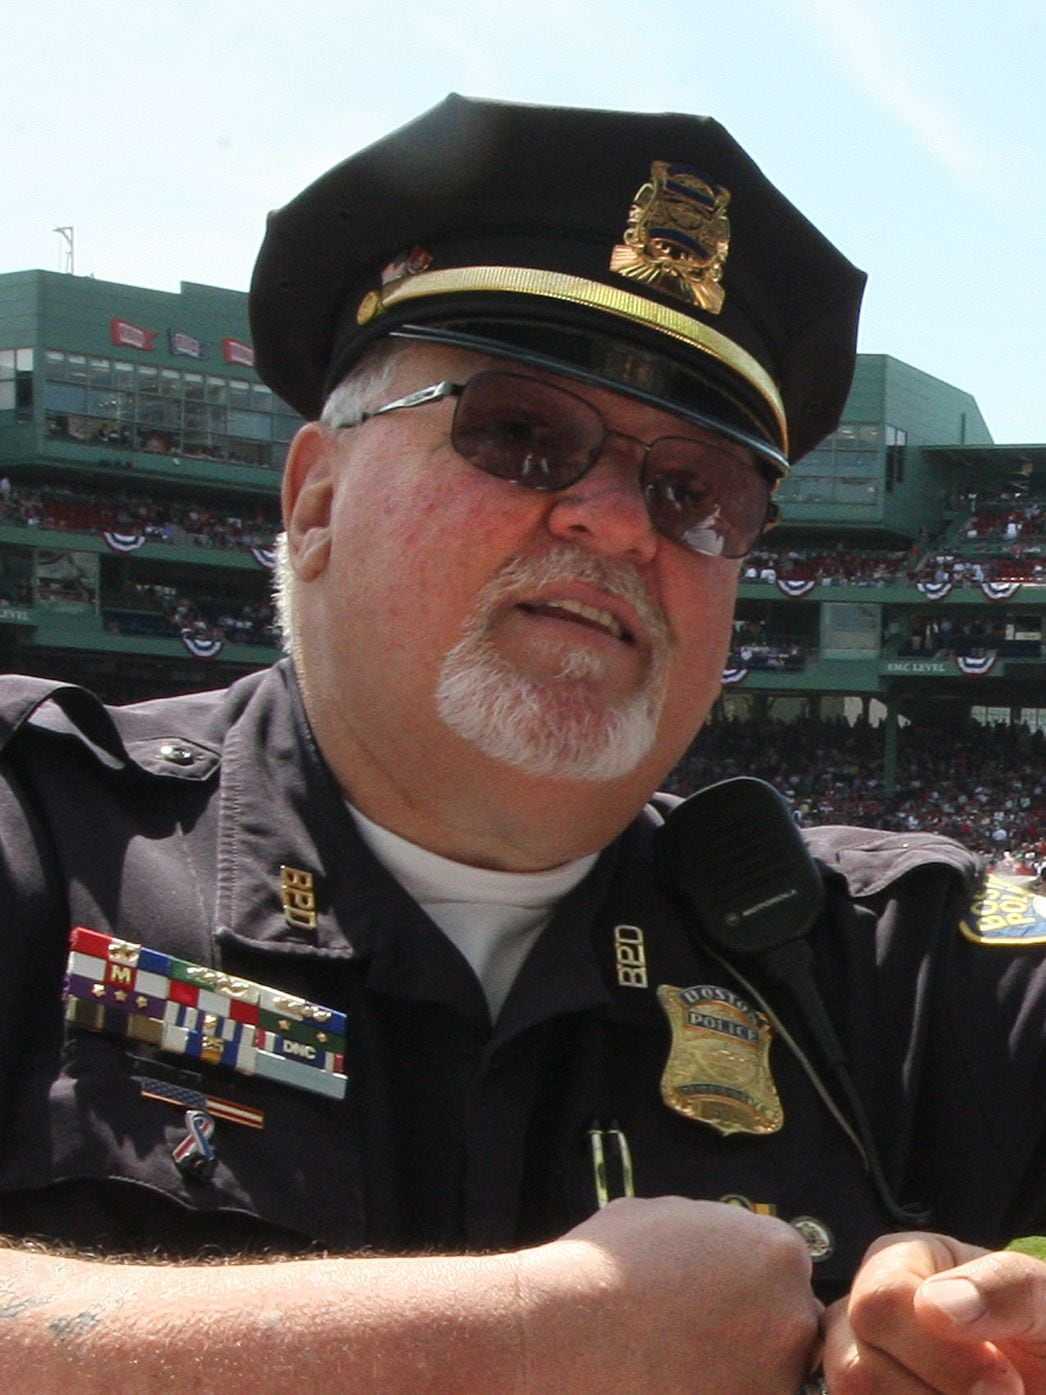 Boston Police officer Billy Dunn fist bumping former Sox closer Keith Foulke at Fenway's 100th birthday celebration in 2012. (Stan Grossfeld/The Boston Globe)